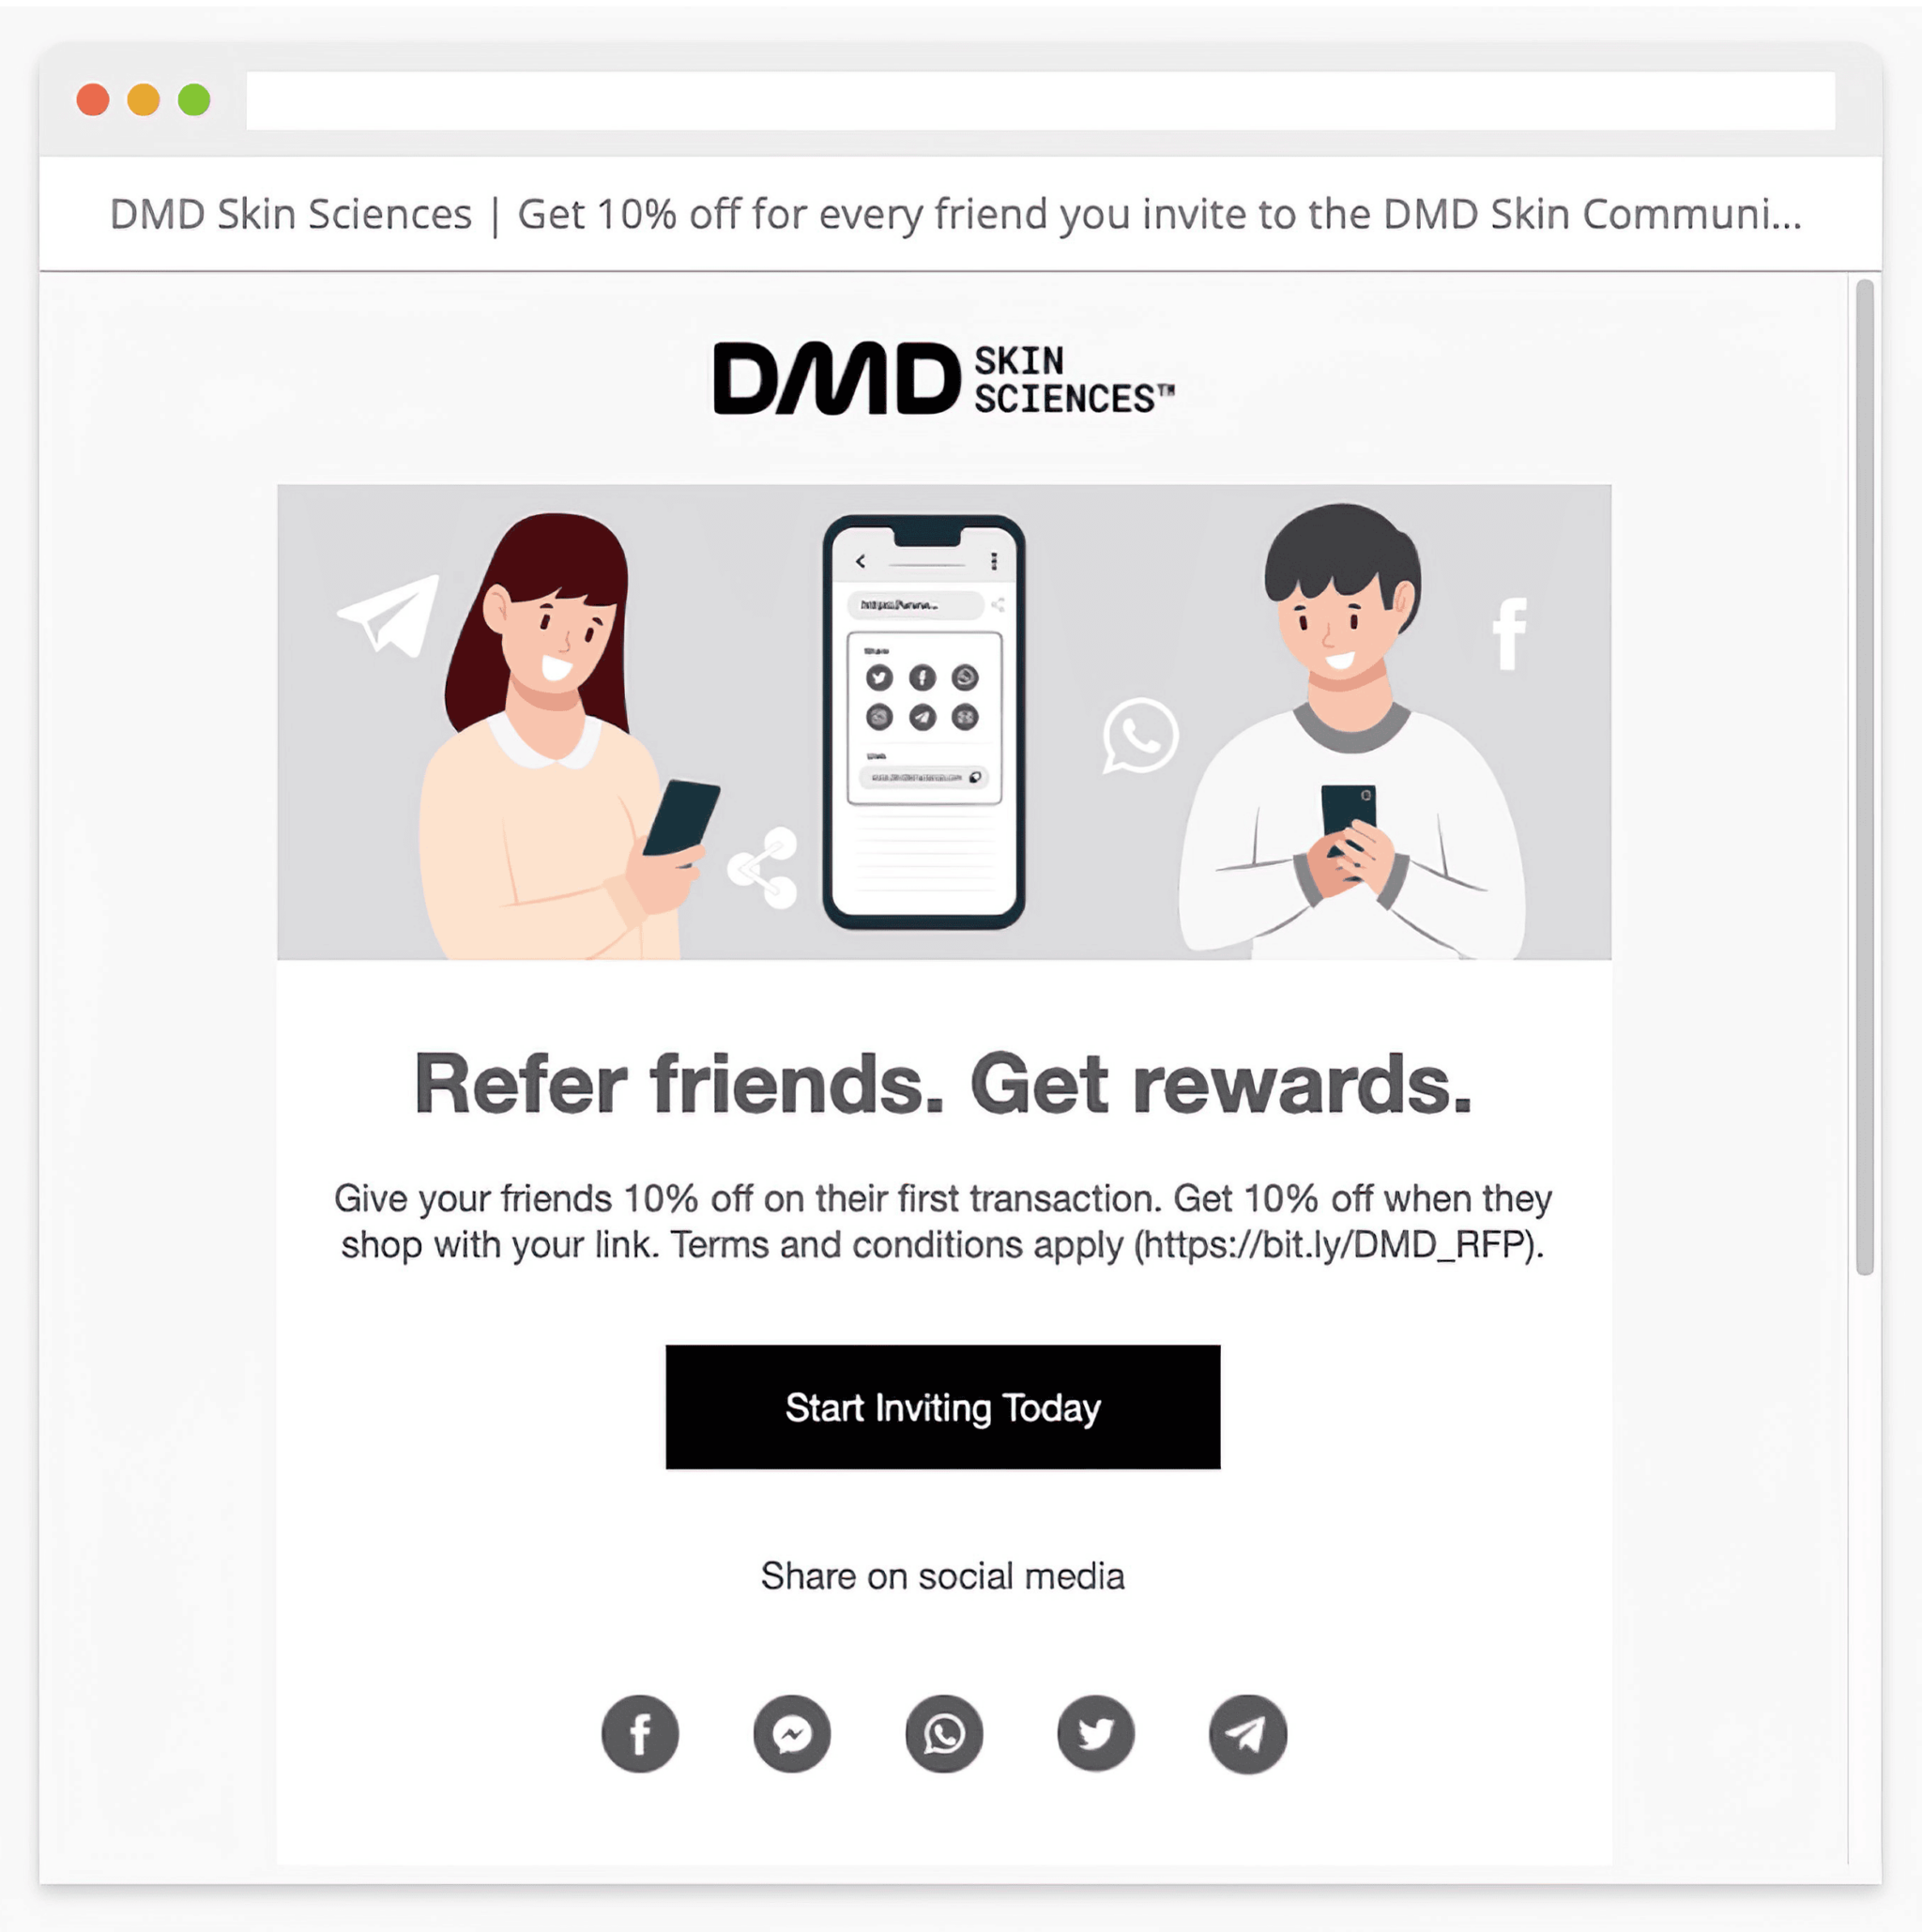 dmd-skin-sciences-email-marketing Small Business Marketing: 6 Proven Strategies for More Reach